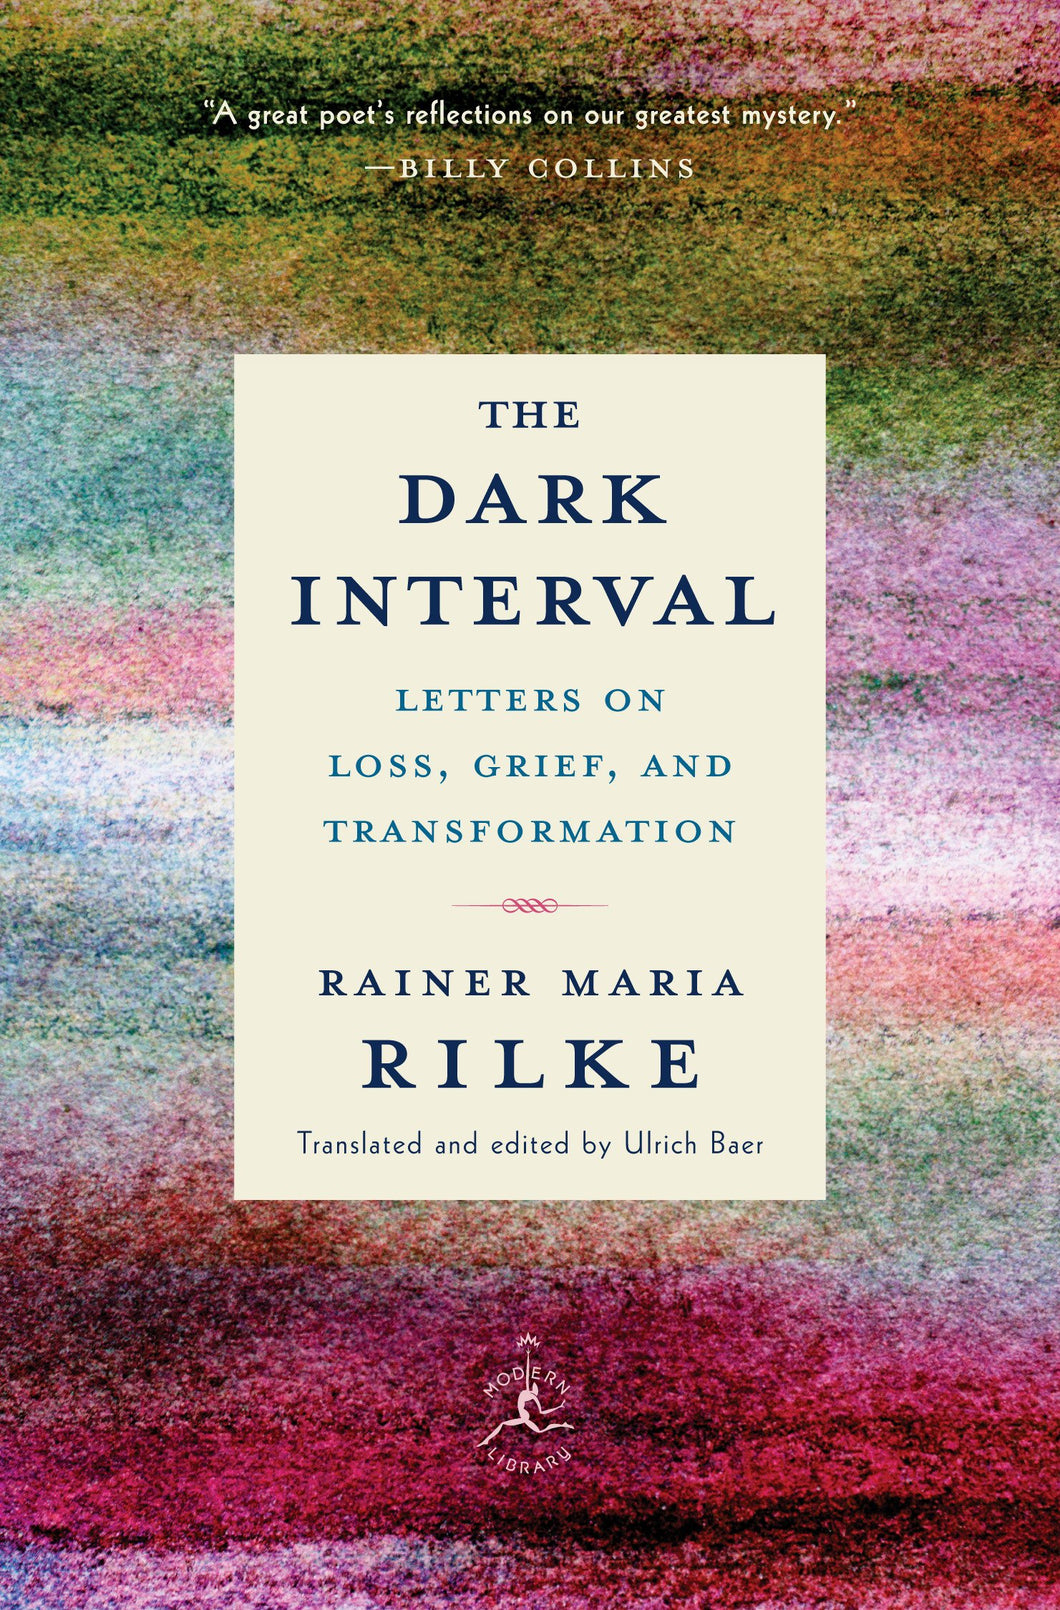 The Dark Interval: Letters on Loss, Grief, and Transformation [Rainer Maria Rilke]